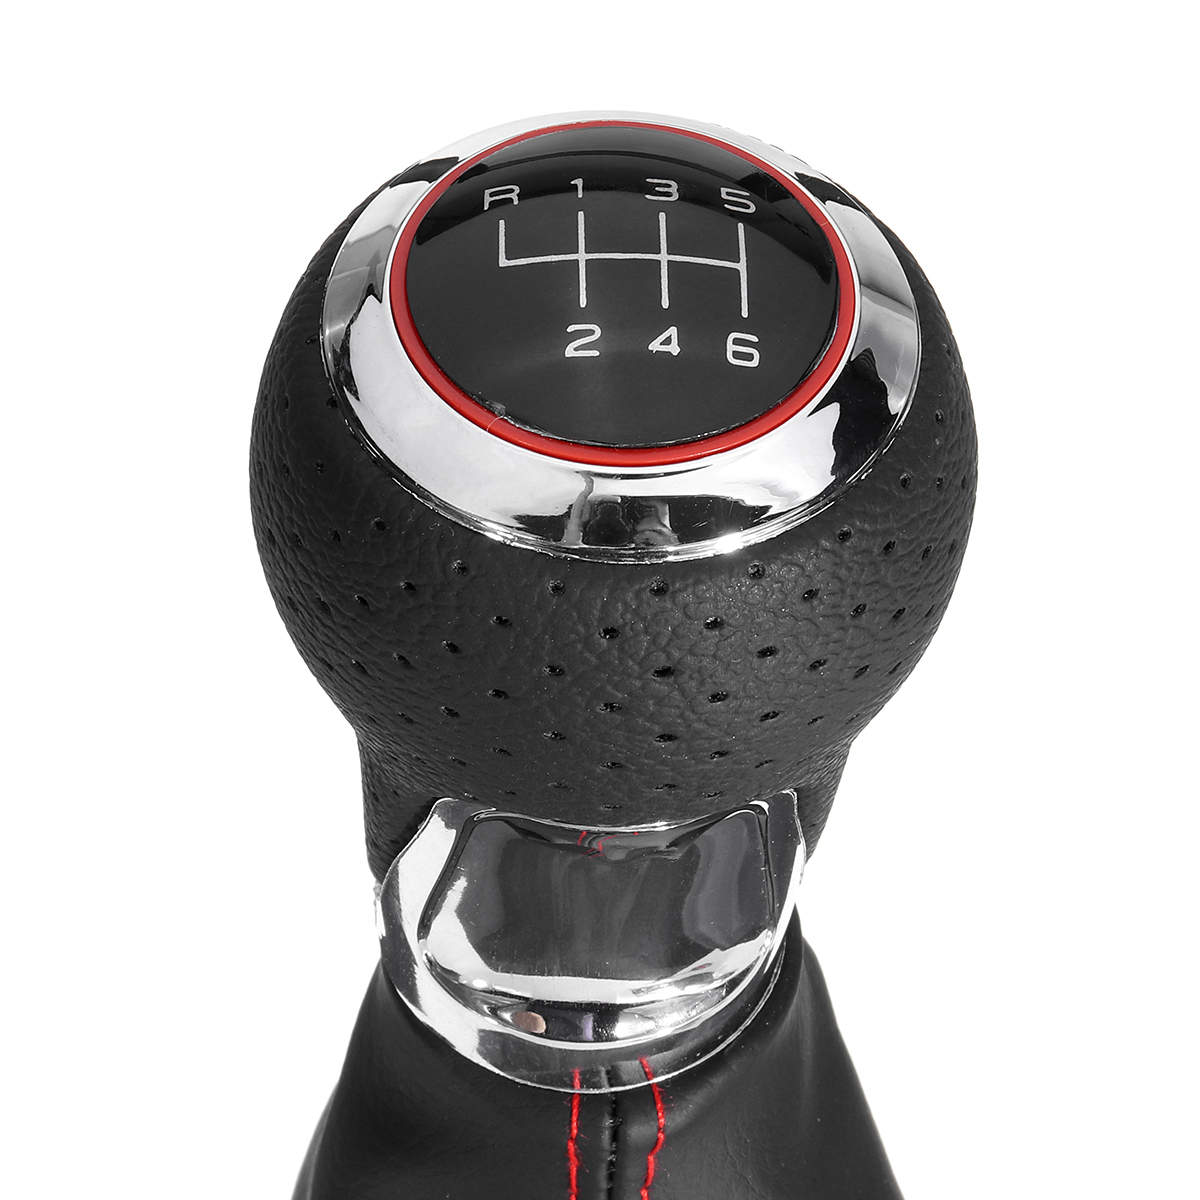 PU Leather 6 Speed Shifter Gear Shift Knob with Boot Cover Handle for Audi A3 S3 8P A4 S4 Q5 - Auto GoShop